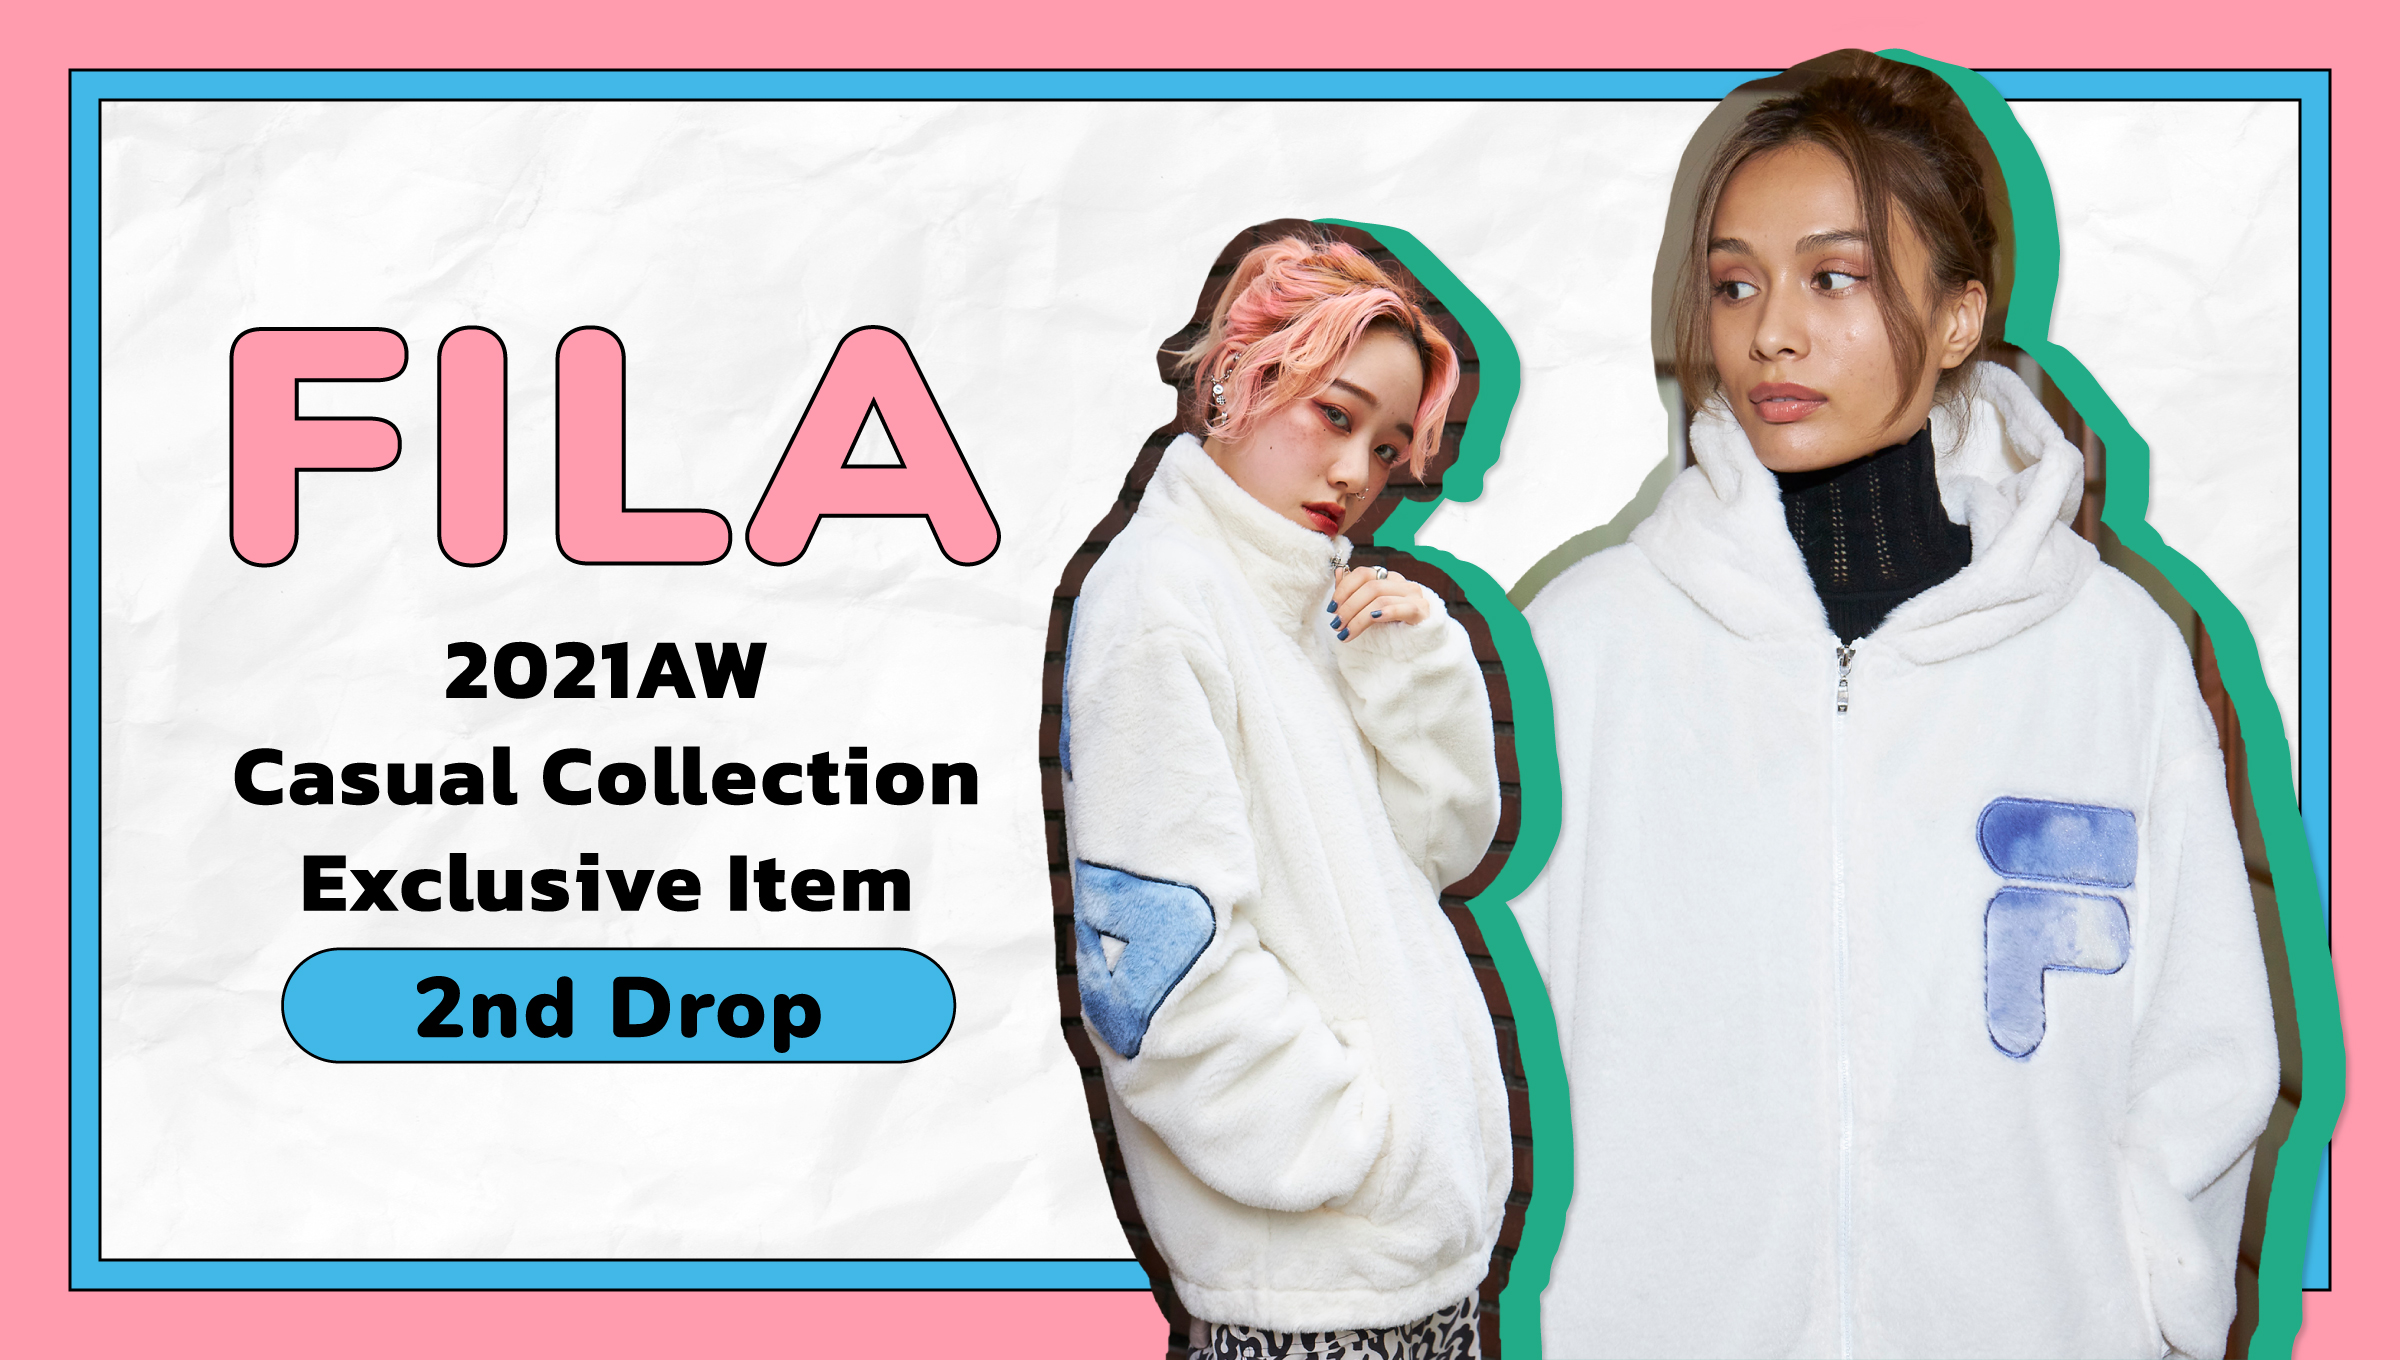 FILA 2021AW Casual COLLECTION EXCLUSIVE ITEM - 2nd Drop -